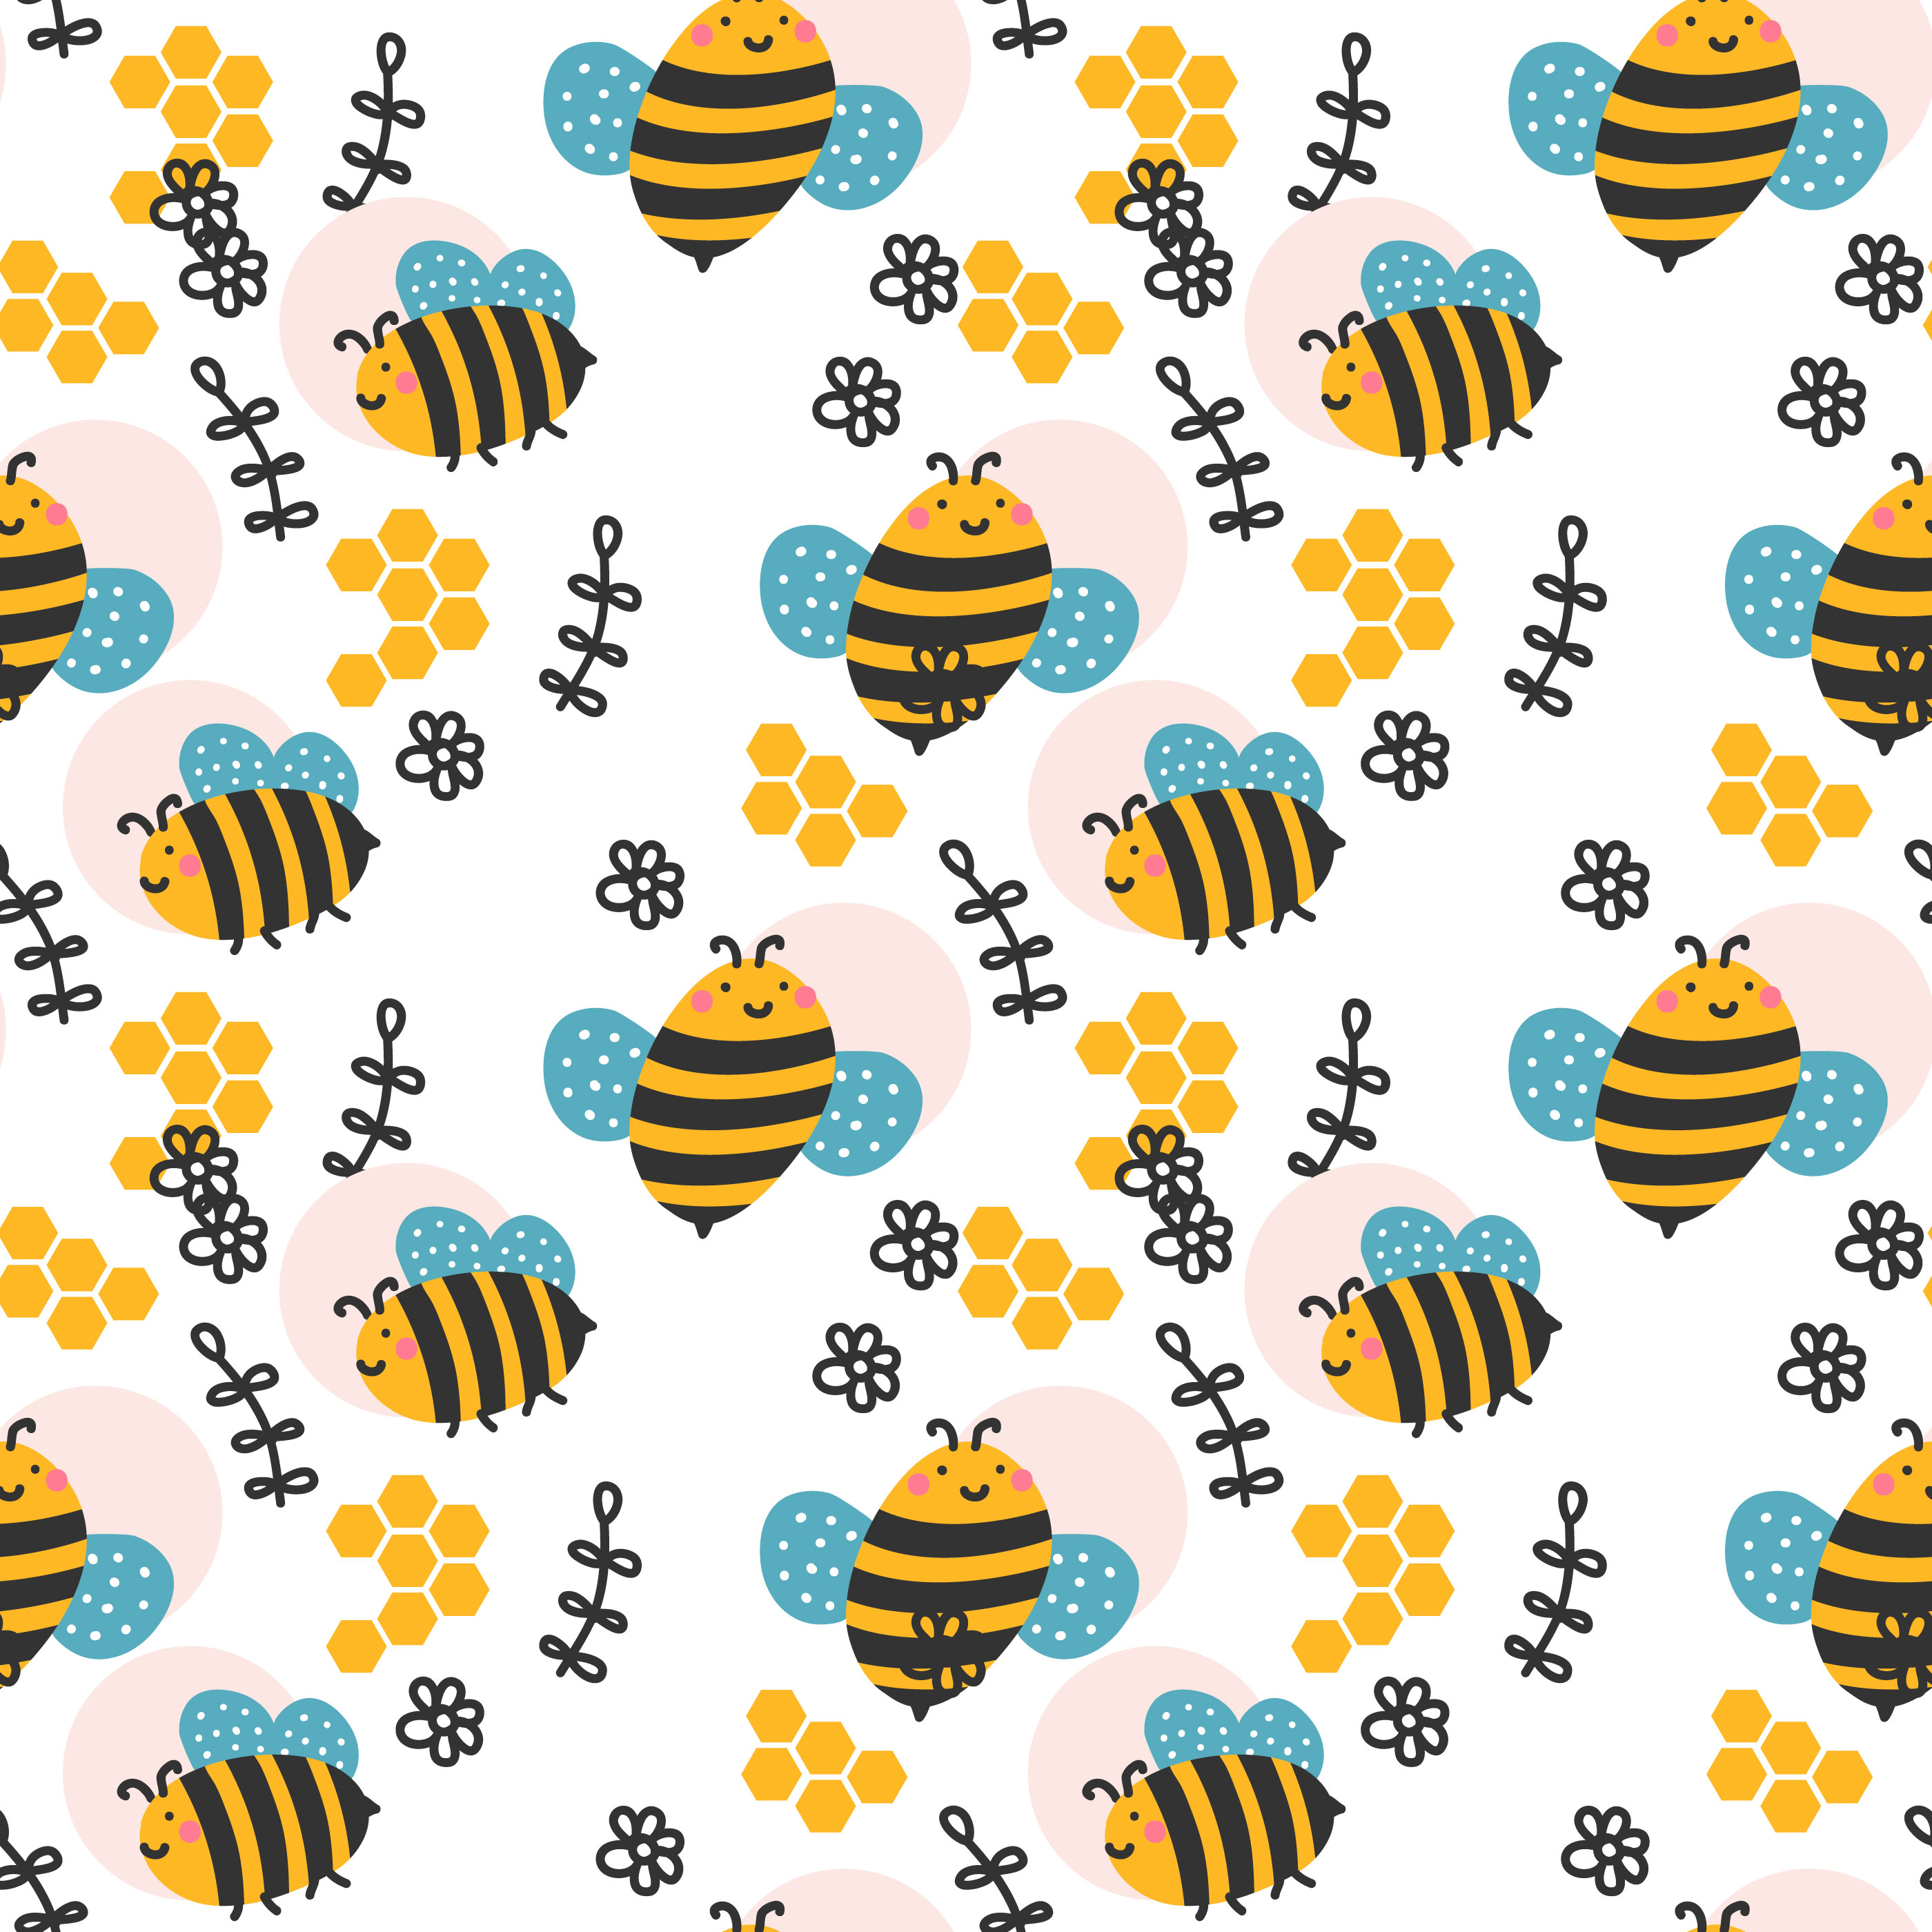 bee-hive-pattern-free-vector-art-150-free-downloads